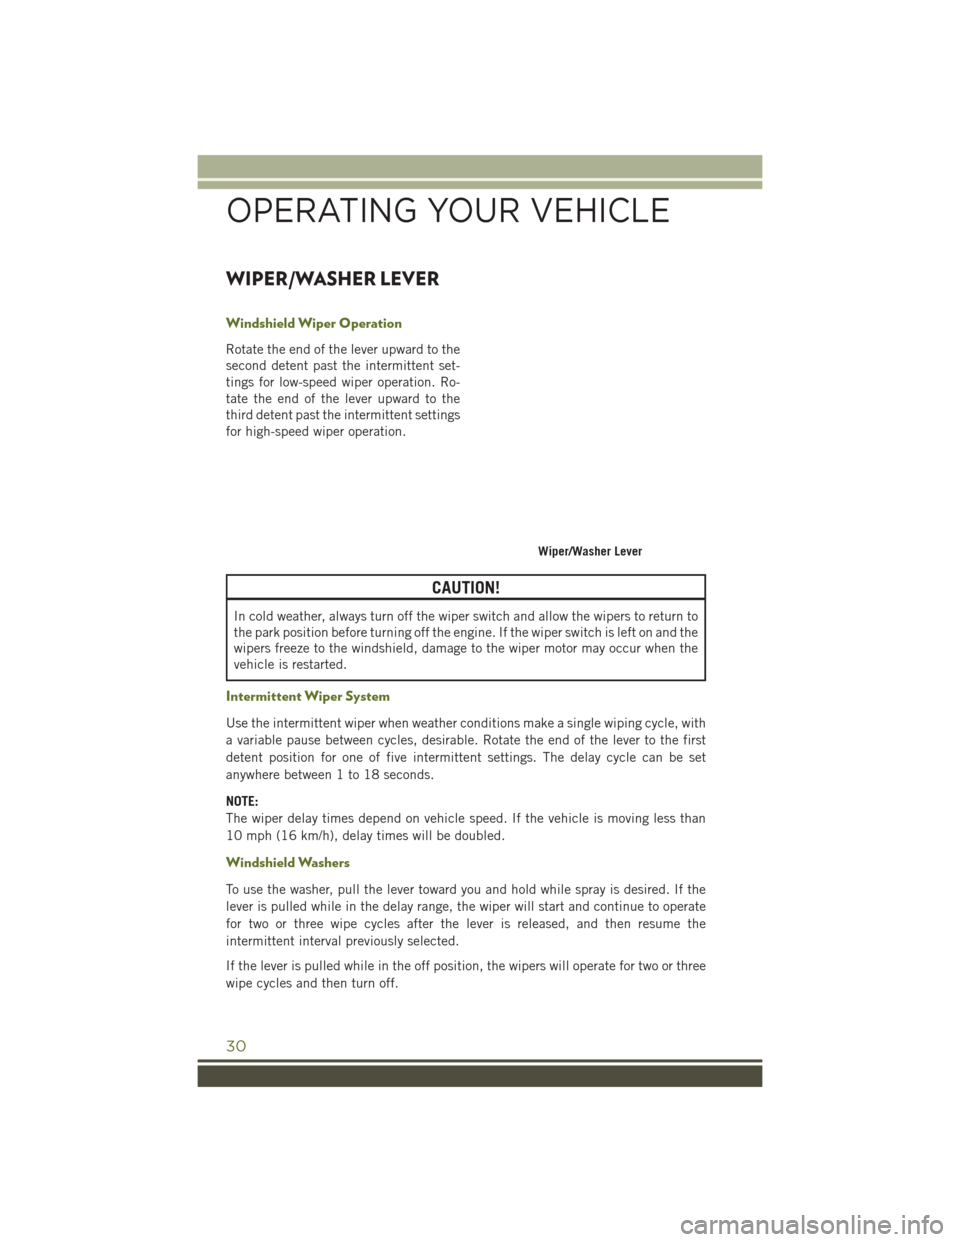 JEEP WRANGLER 2016 JK / 3.G User Guide WIPER/WASHER LEVER
Windshield Wiper Operation
Rotate the end of the lever upward to the
second detent past the intermittent set-
tings for low-speed wiper operation. Ro-
tate the end of the lever upwa